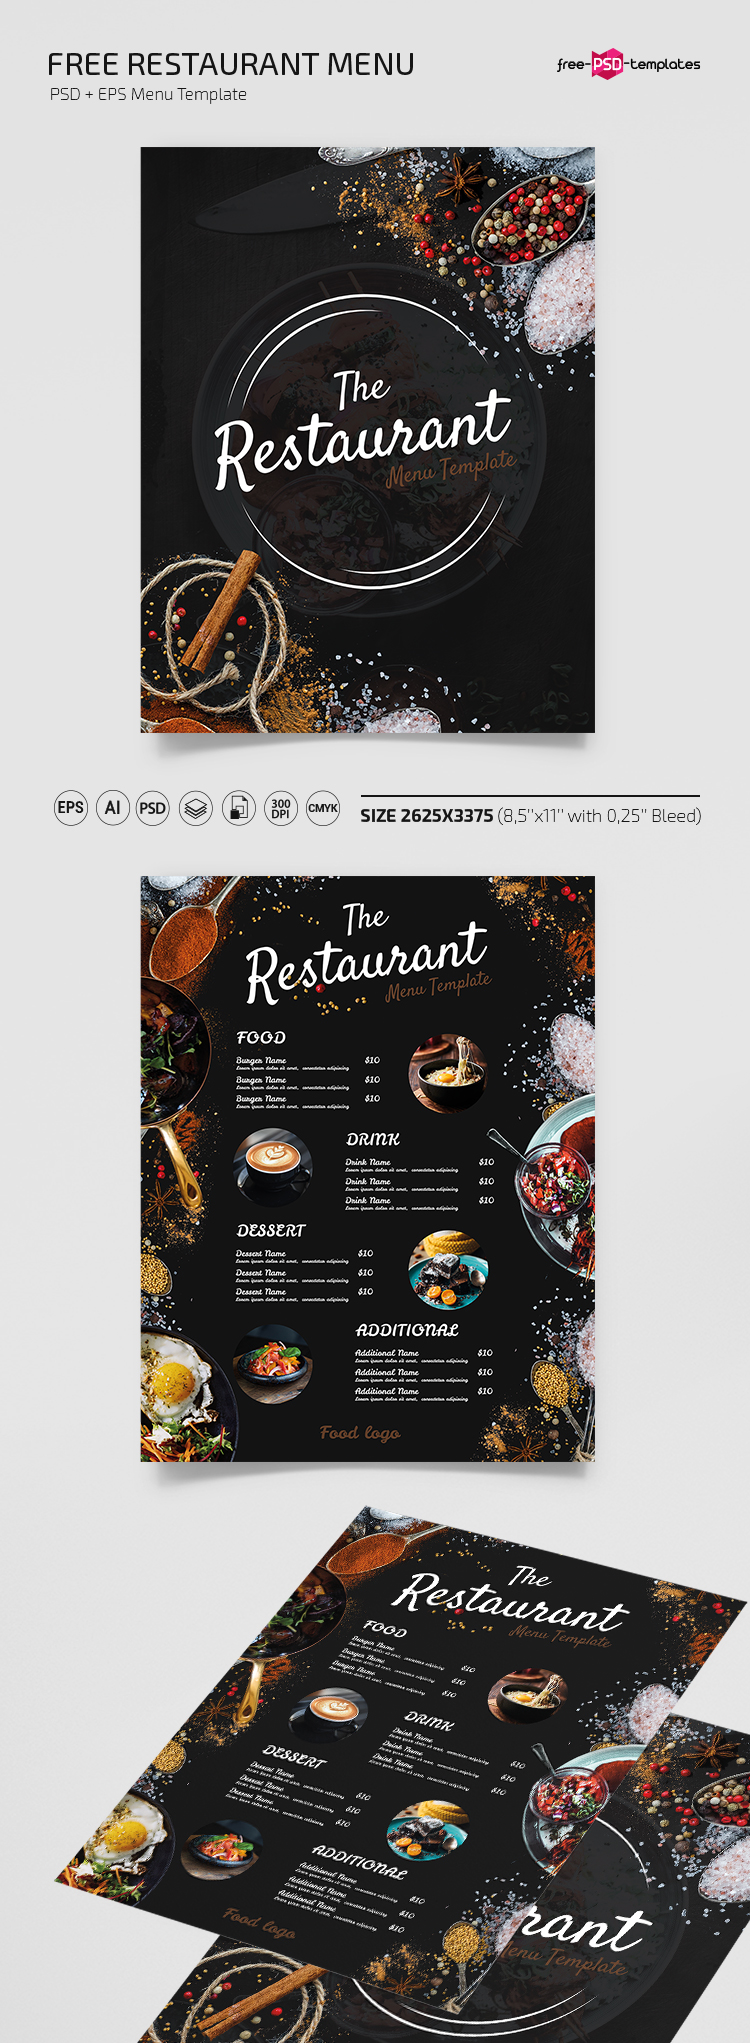 Download Free Restaurant Menu Templates in PSD + Vector (.ai+.eps) | Free PSD Templates